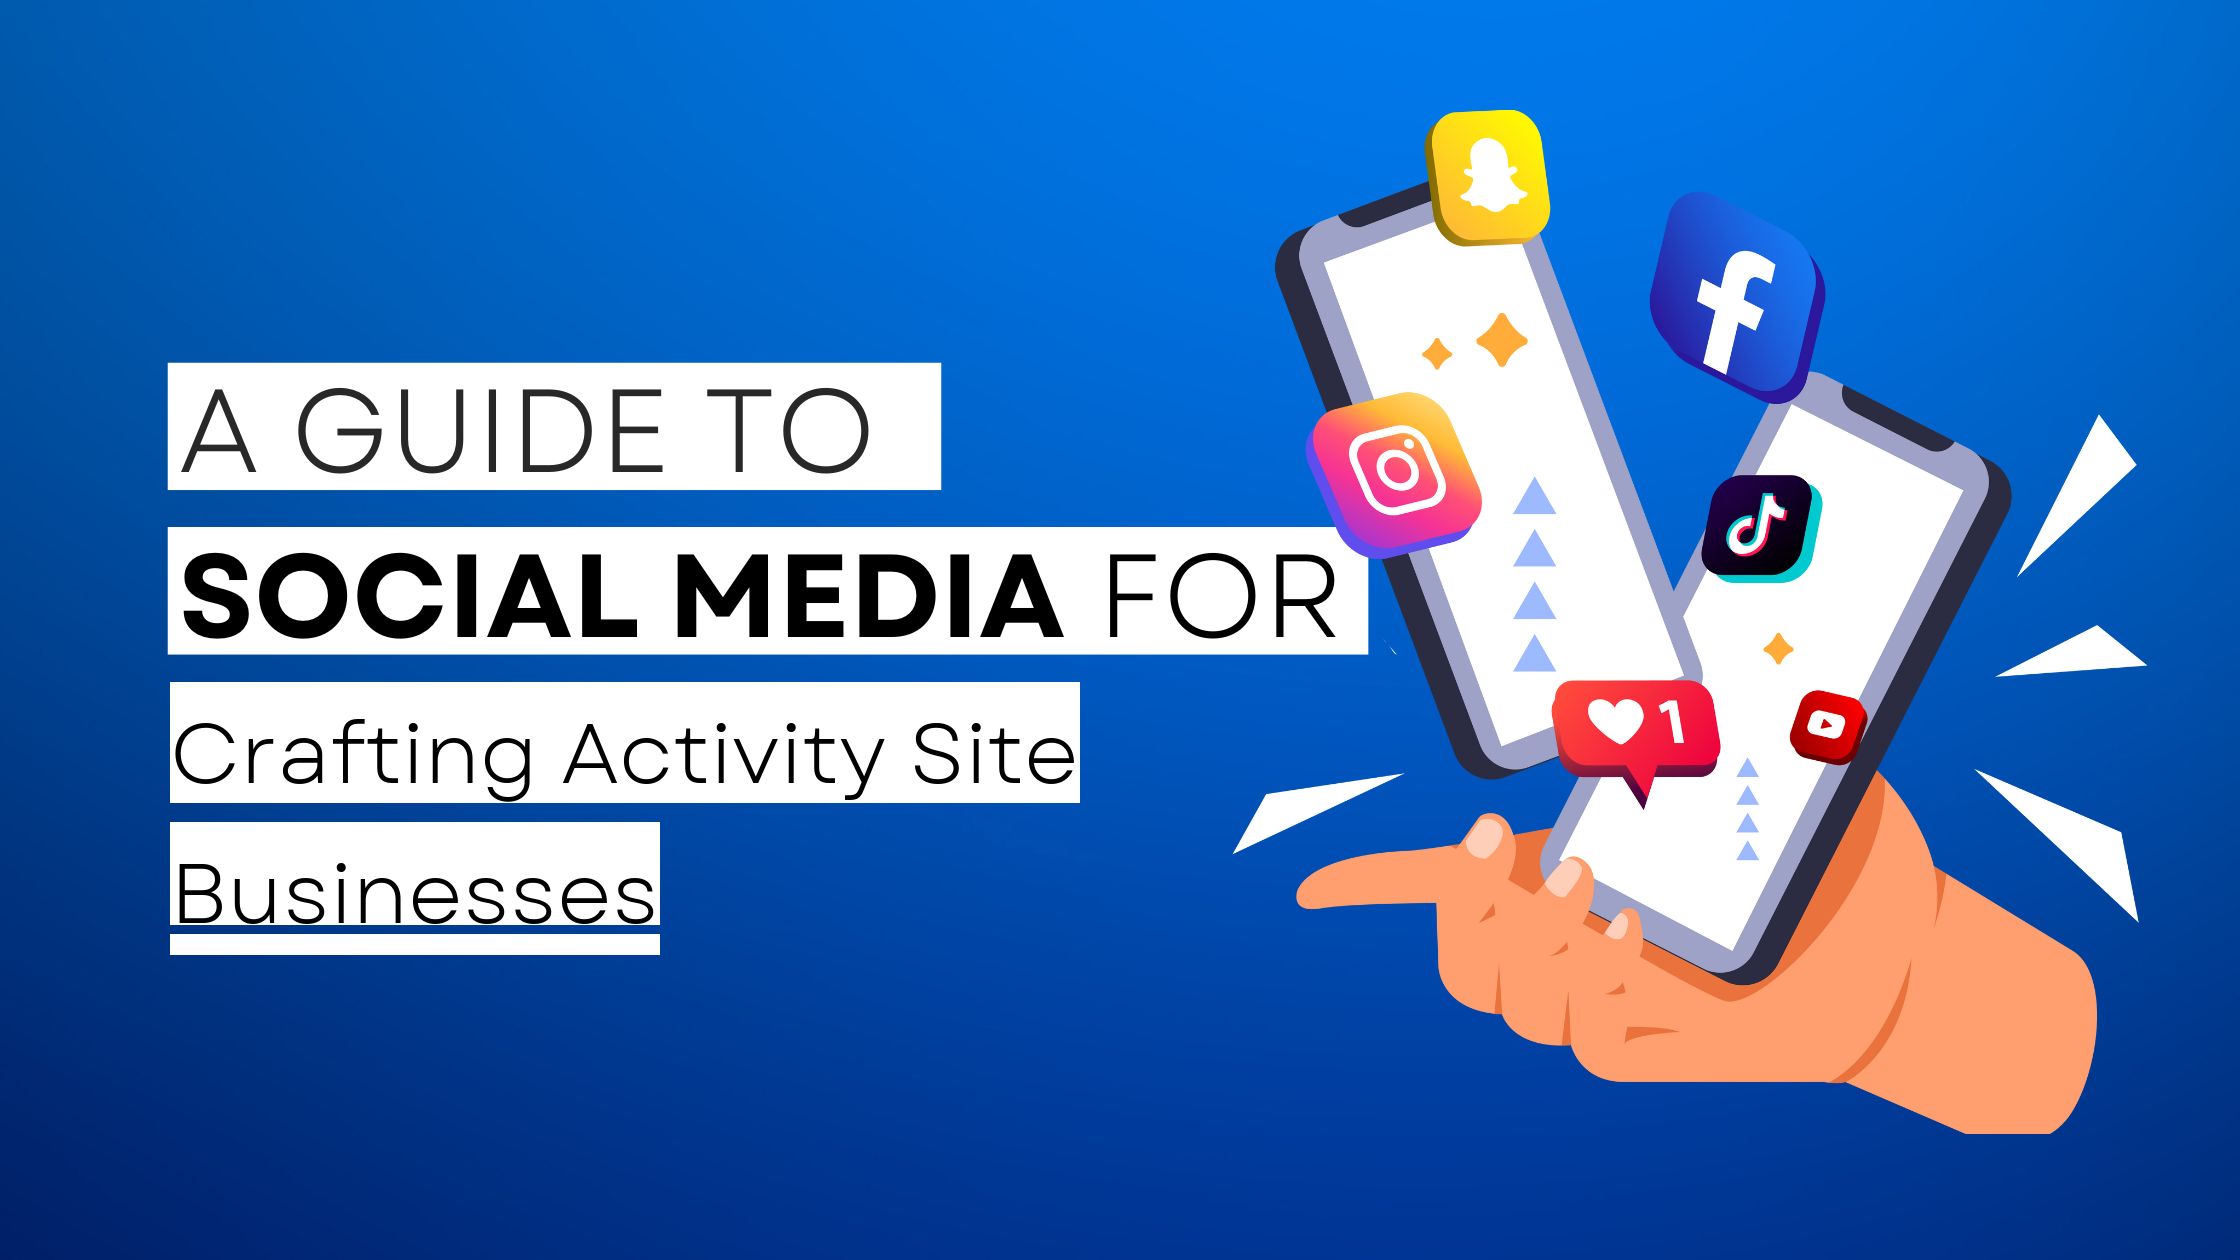 How to start Crafting Activity Site on social media